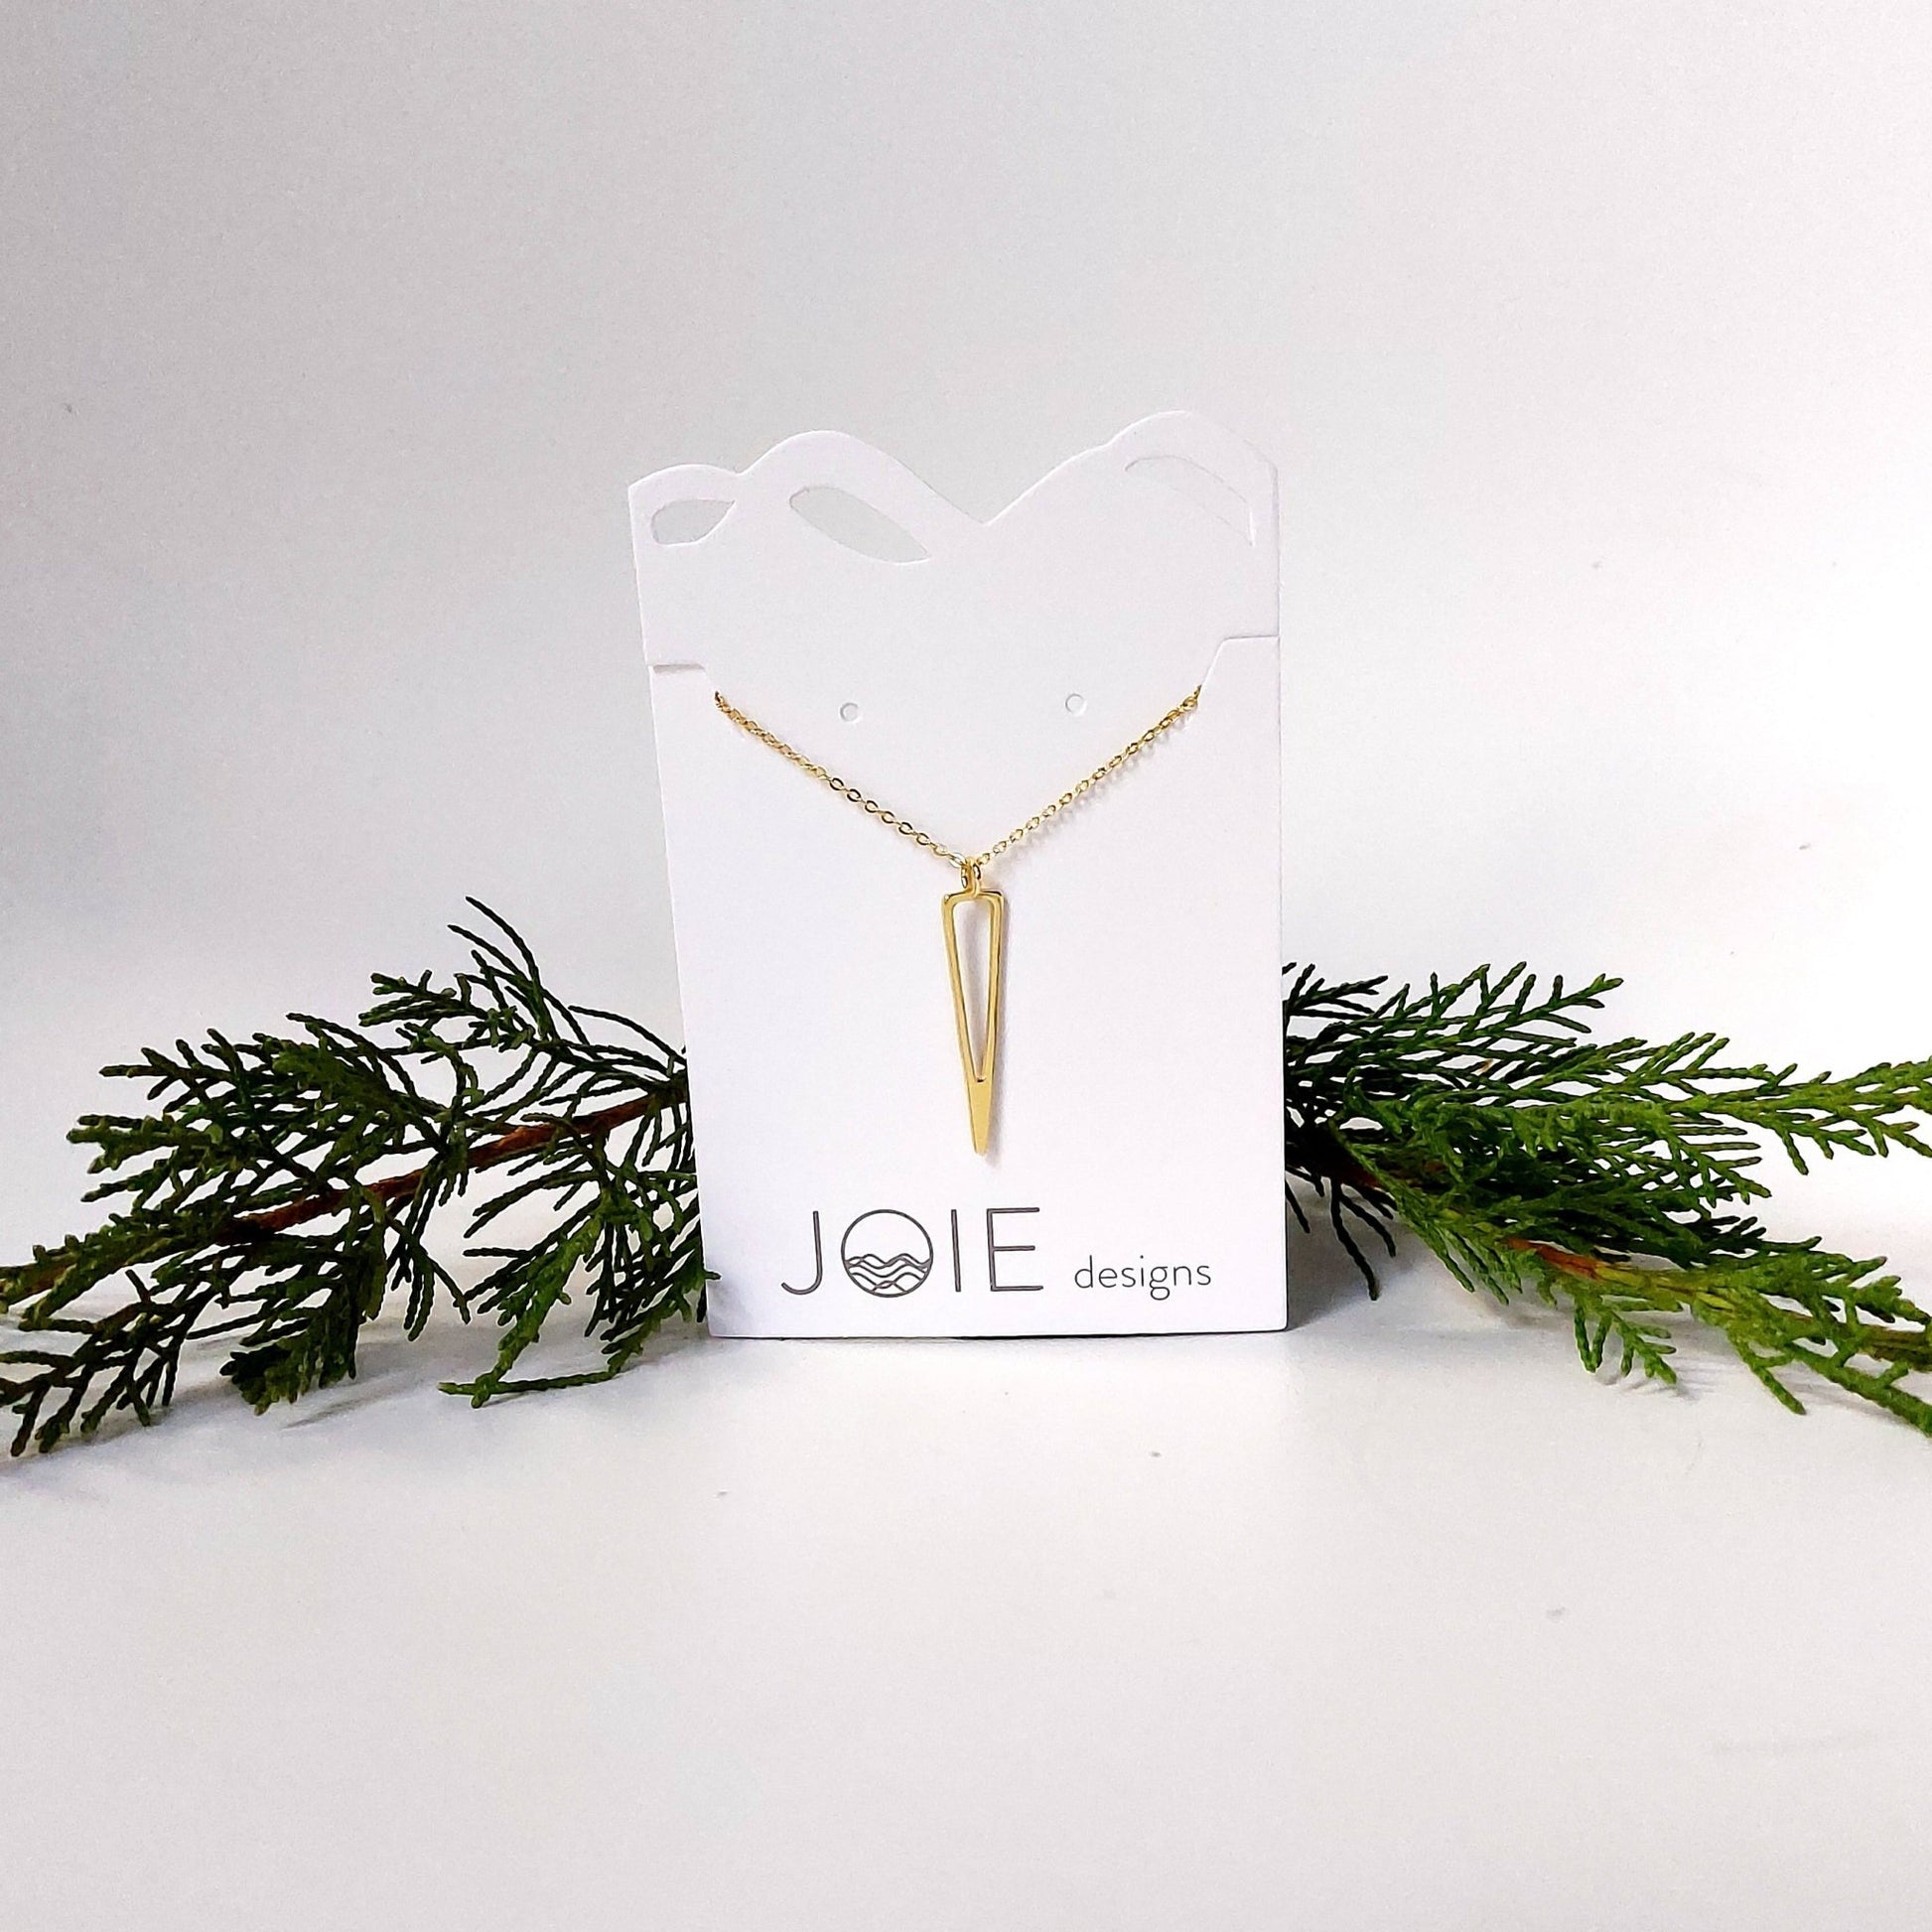 18k yellow gold plated icicle design pendant necklace showcased on a jewellery card with pine and cedar in background